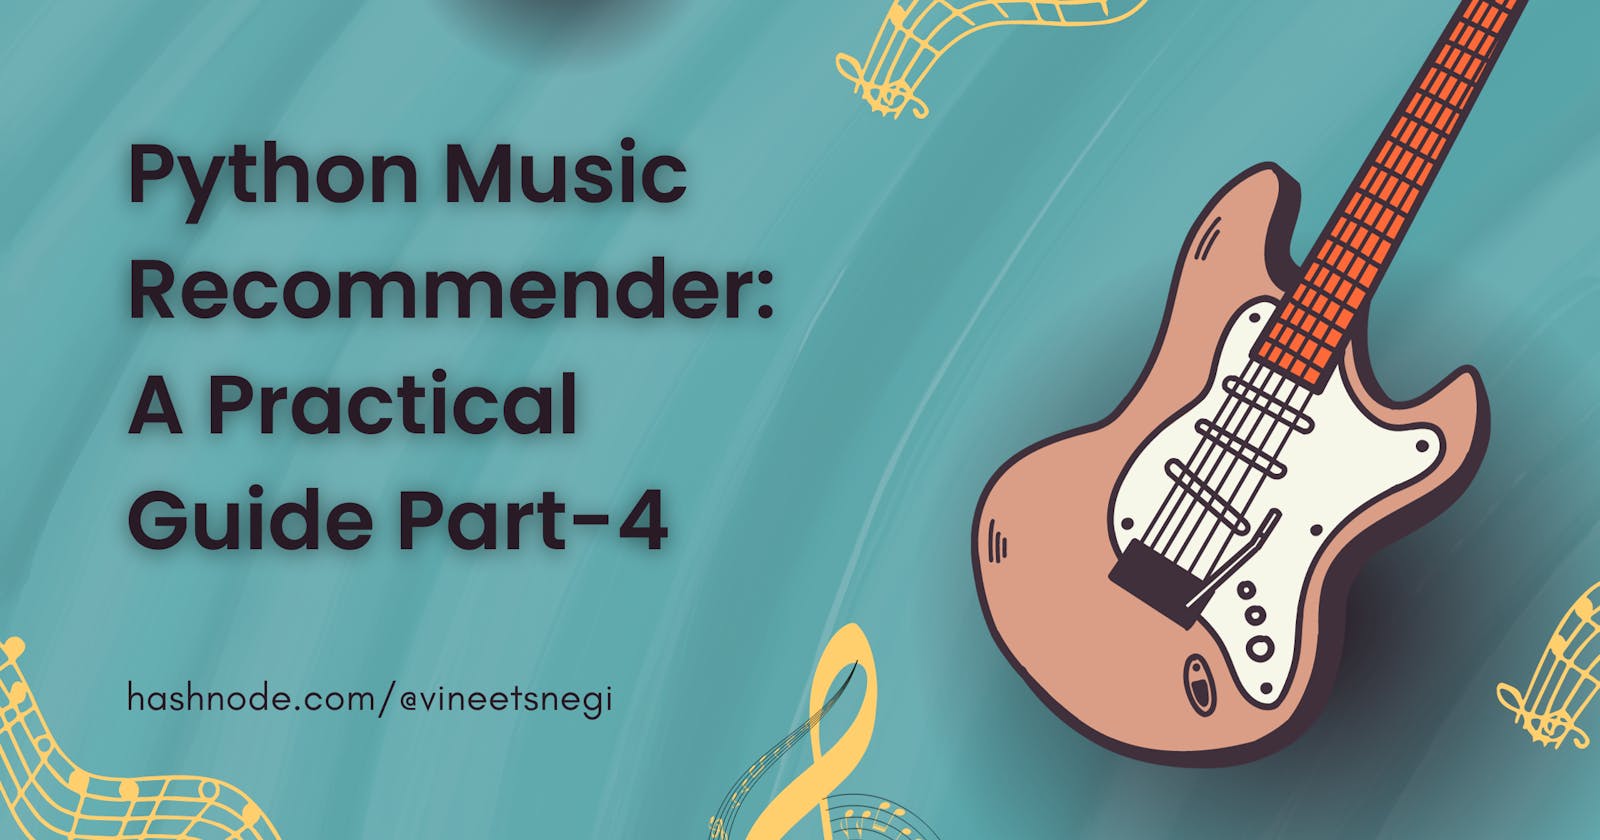 Python Music Recommender: A Practical Guide Part-4